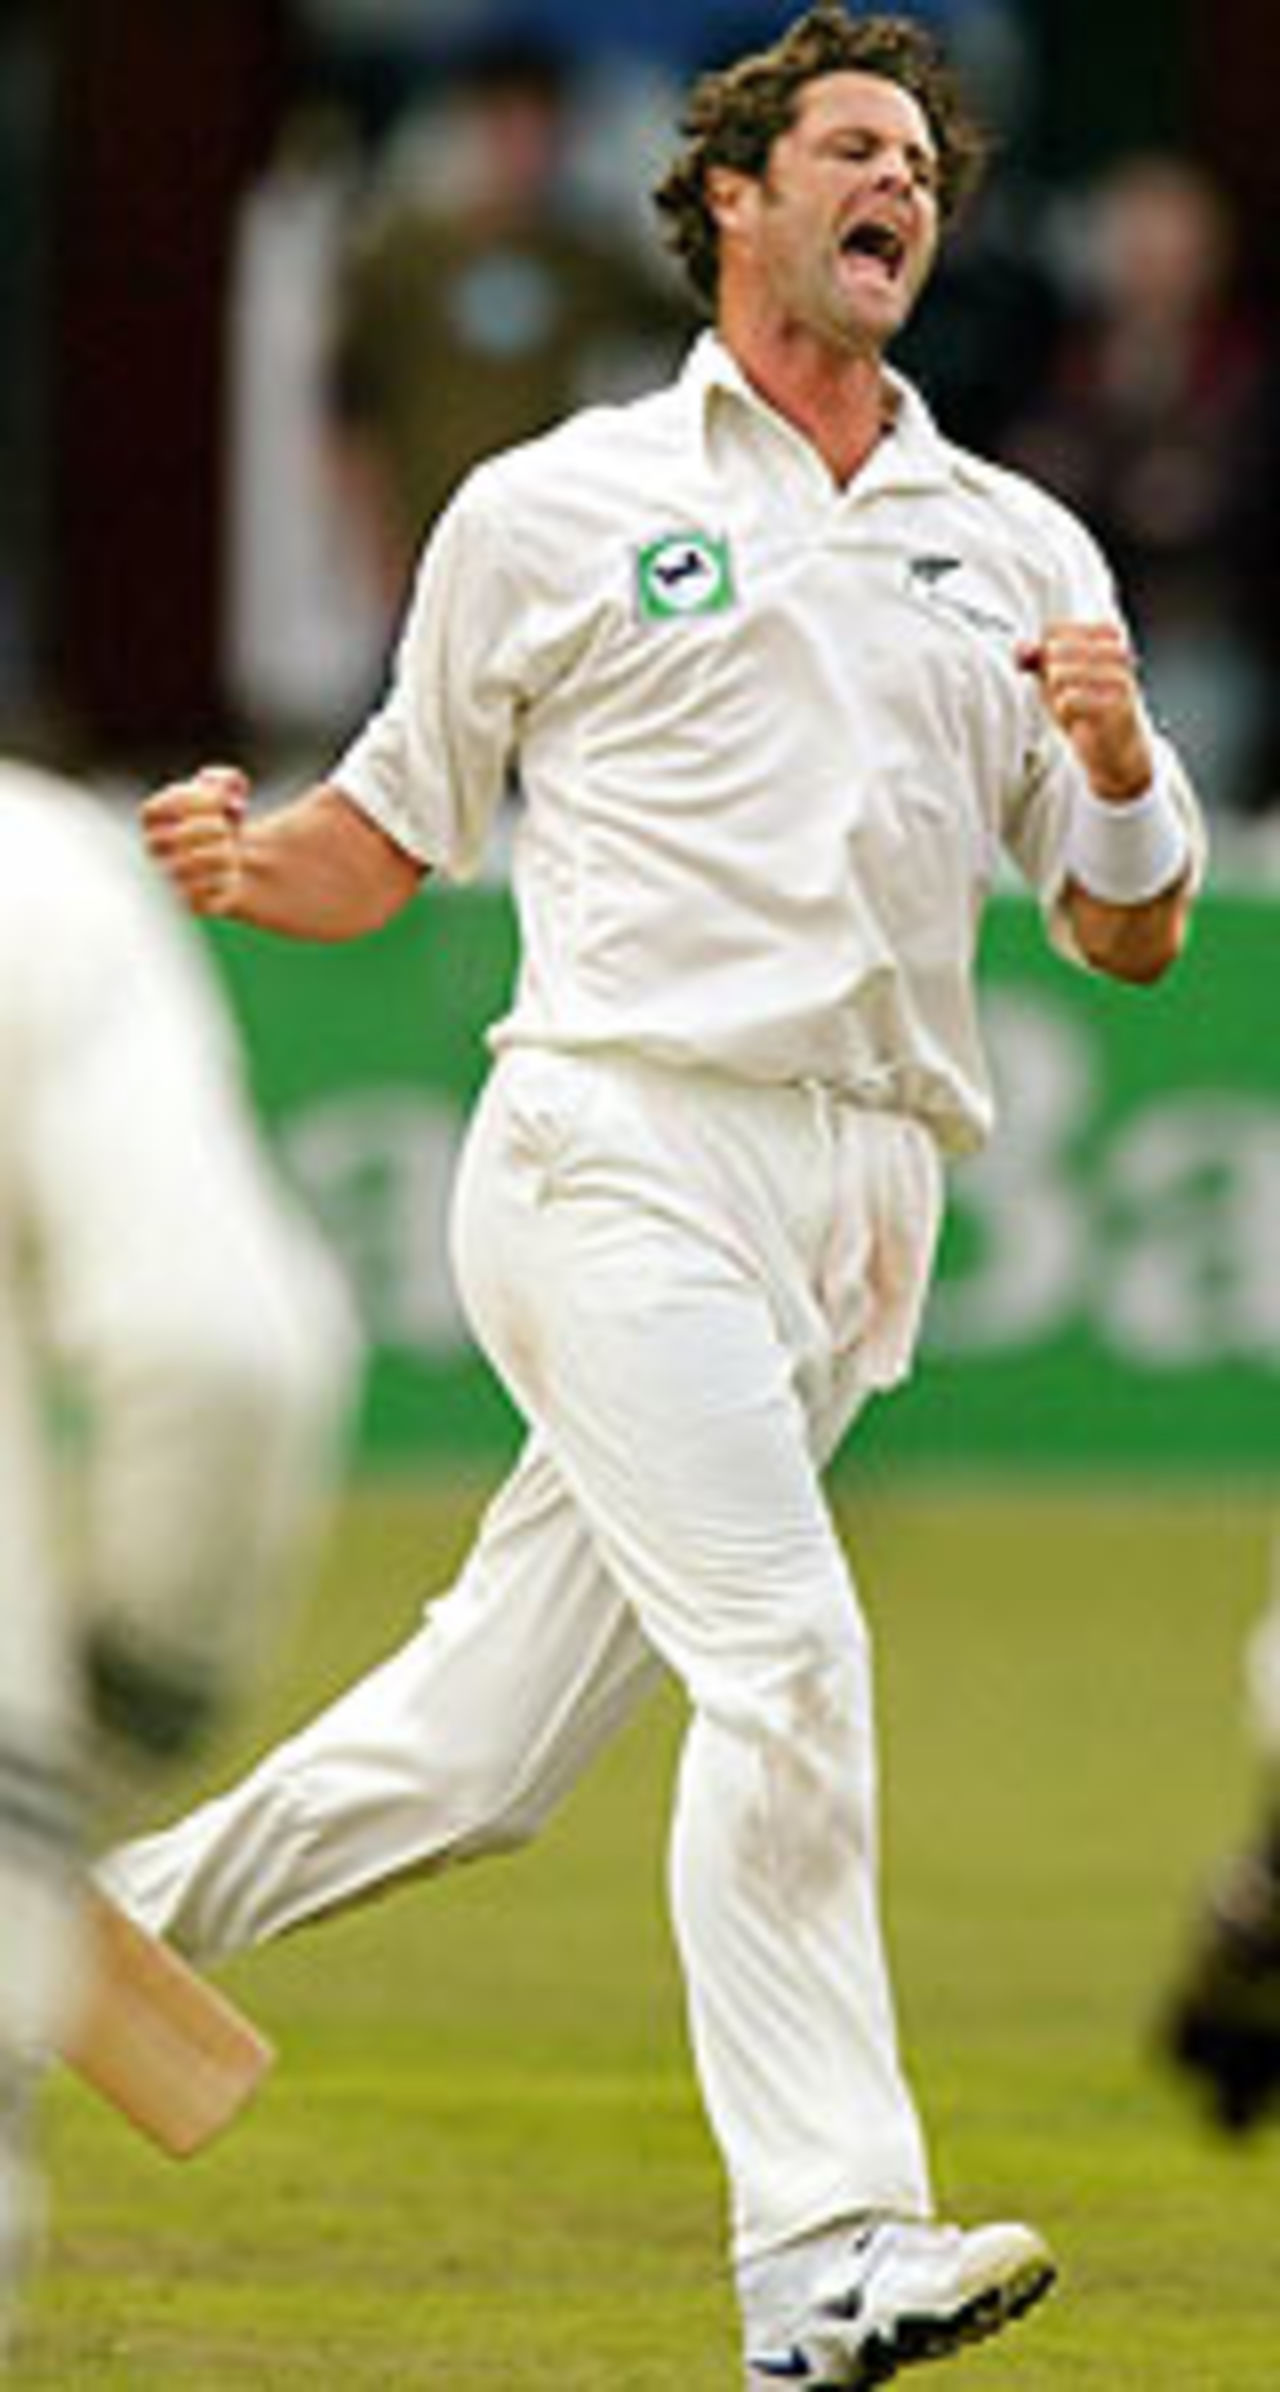 Chris Cairns is happy with a wicket, New Zealand v South Africa, 3rd Test, Wellington, 2nd day, March 27, 2004